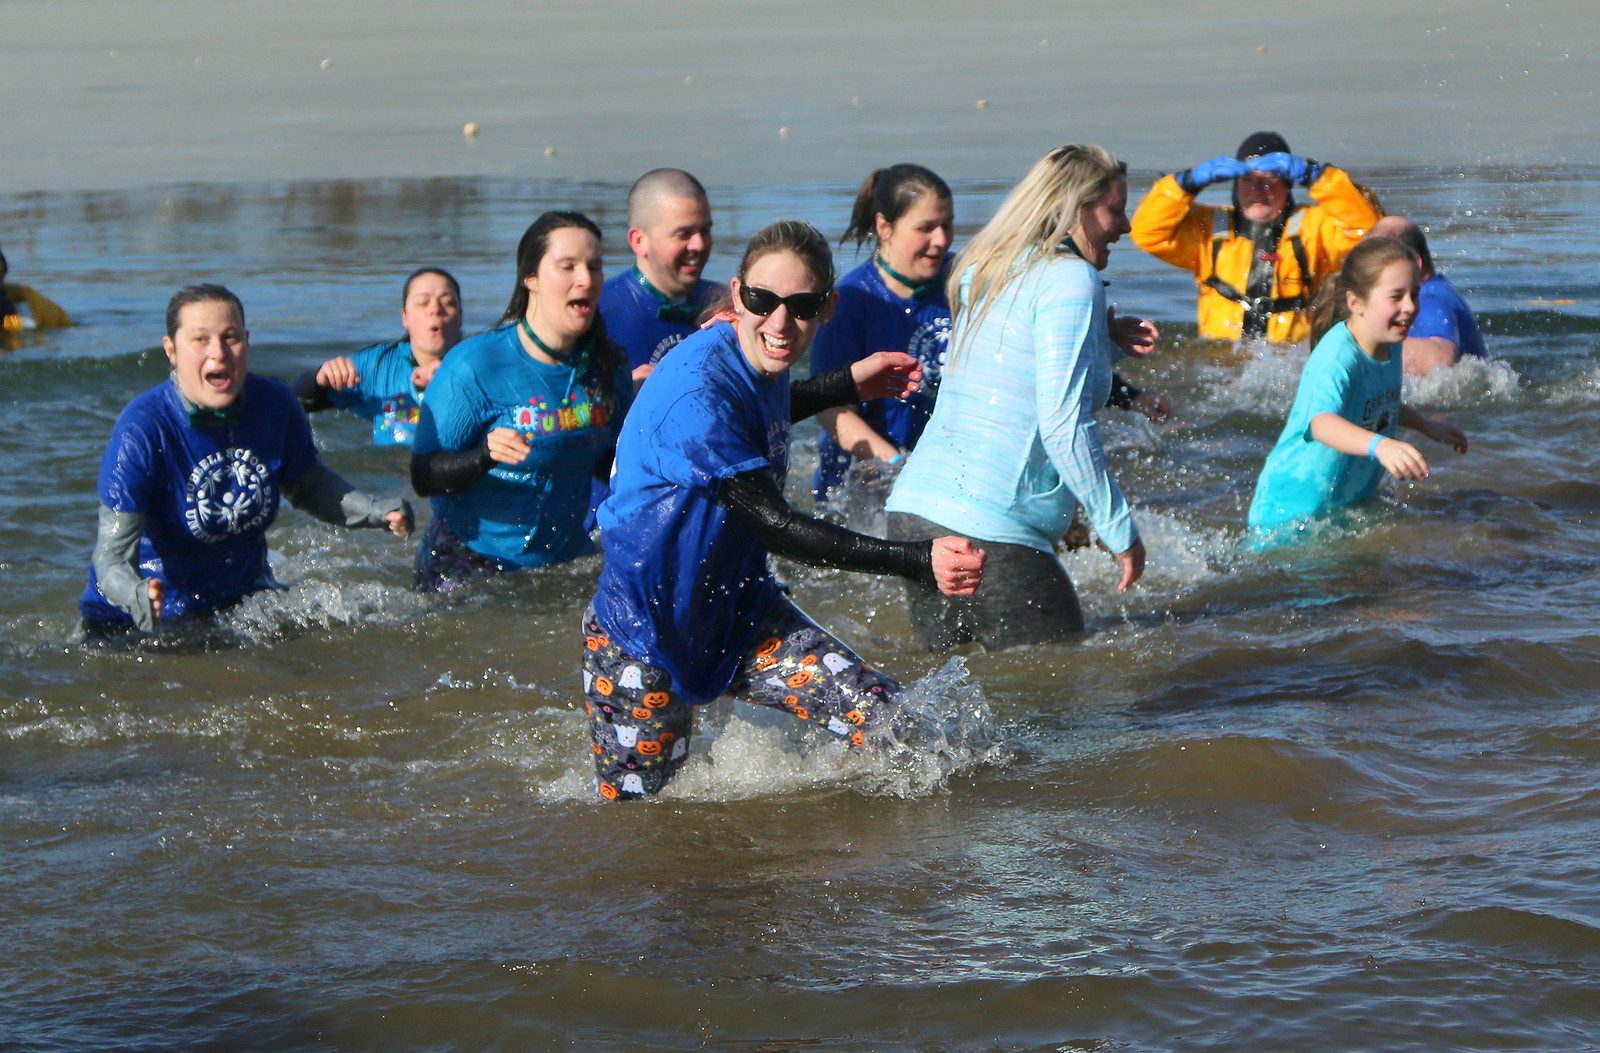 2020 Penguin Plunge Events Across The State To Support Special Olympics